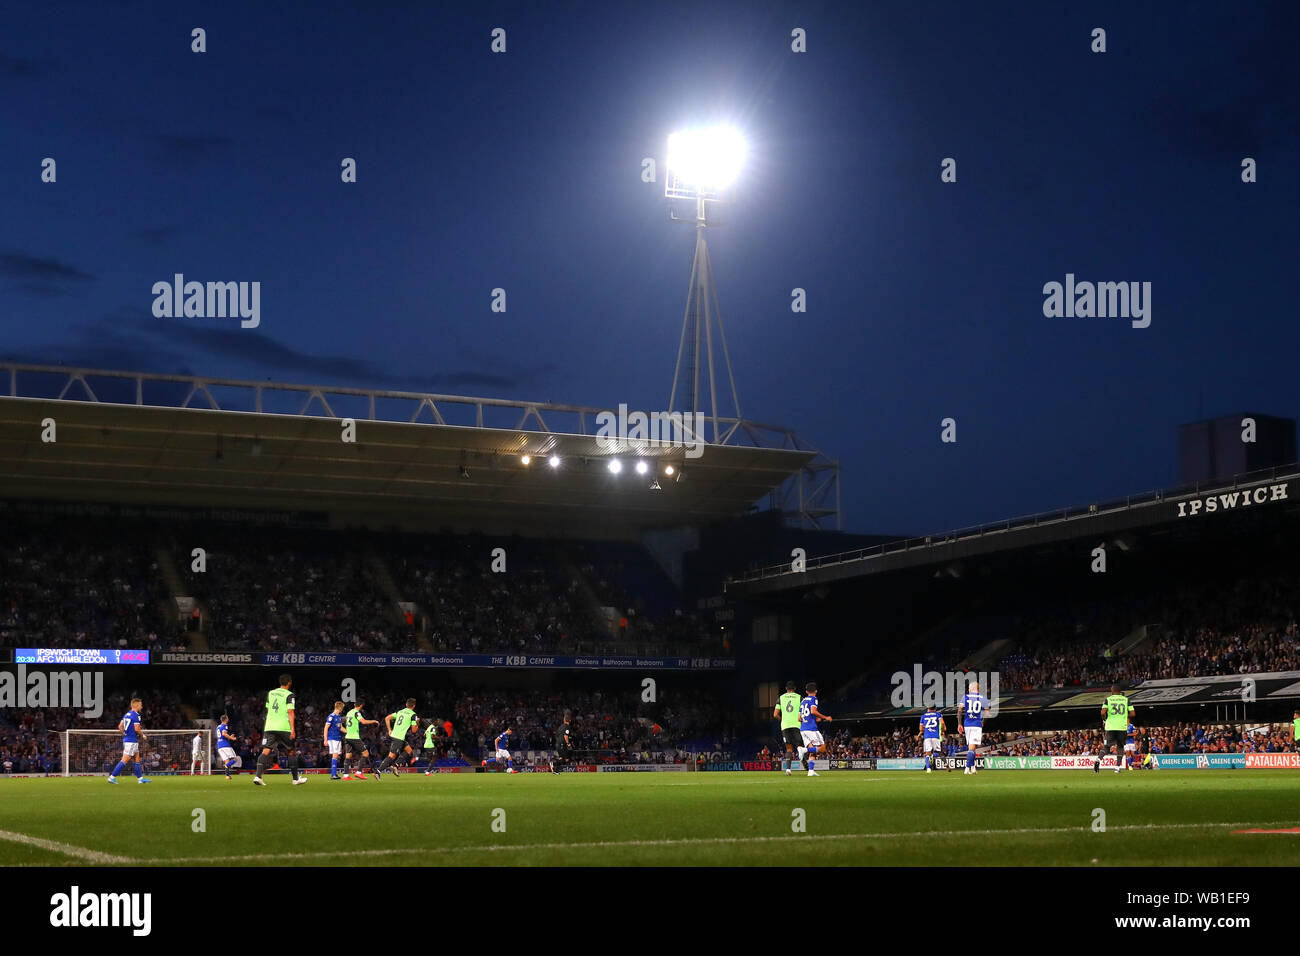 General view of Portman Road, Home of Ipswich Town Football Club - Ipswich Town v AFC Wimbledon, Sky Bet League One, Portman Road, Ipswich, UK - 20th August 2019  Editorial Use Only - DataCo restrictions apply Stock Photo